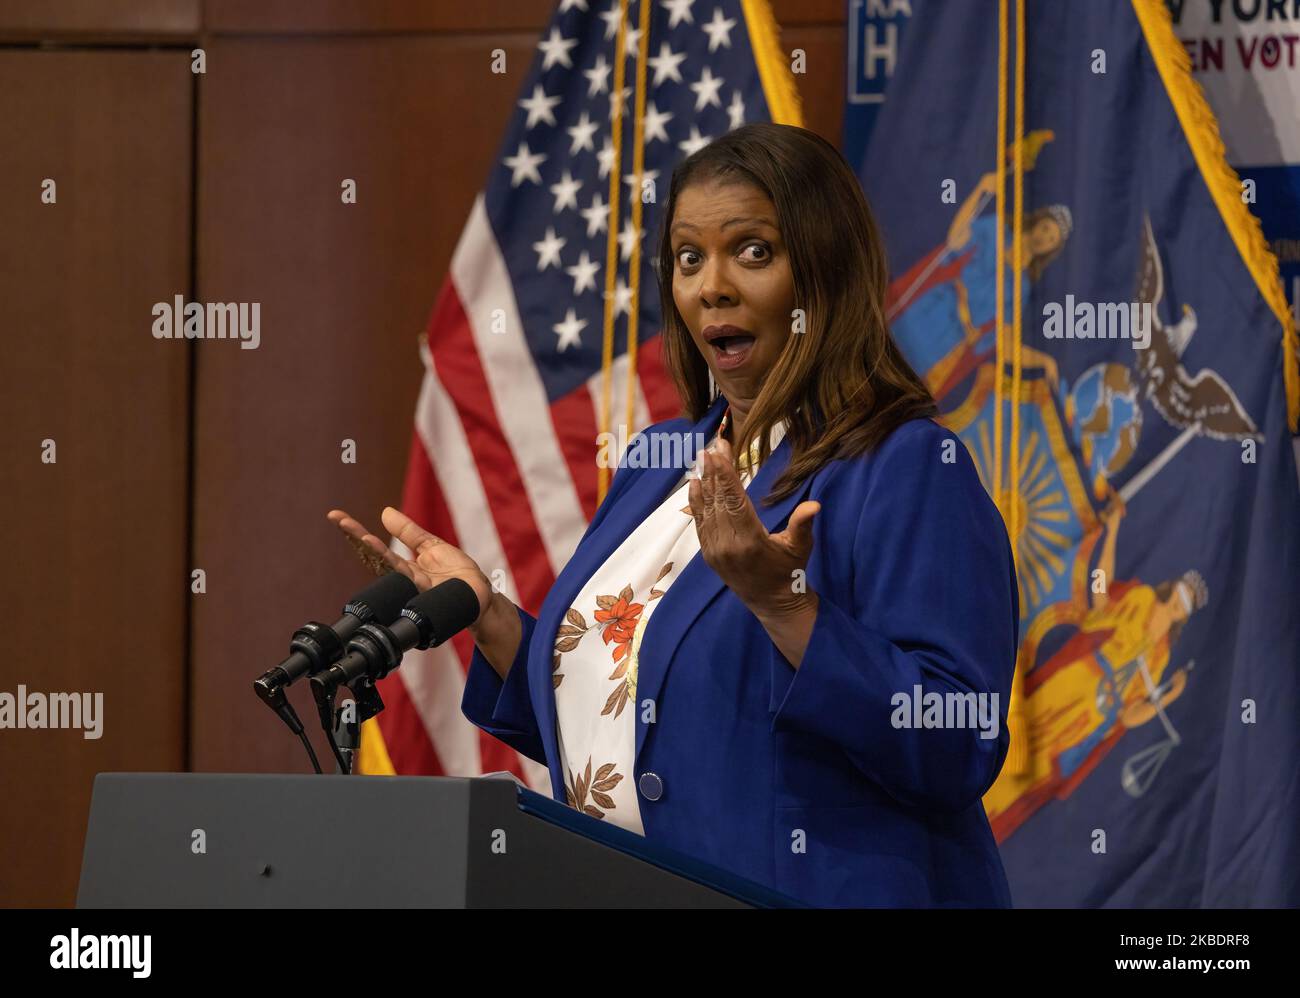 NEW YORK, N.Y. – November 3, 2022: New York Attorney General Letitia James addresses a campaign rally at Barnard College in New York City. Stock Photo